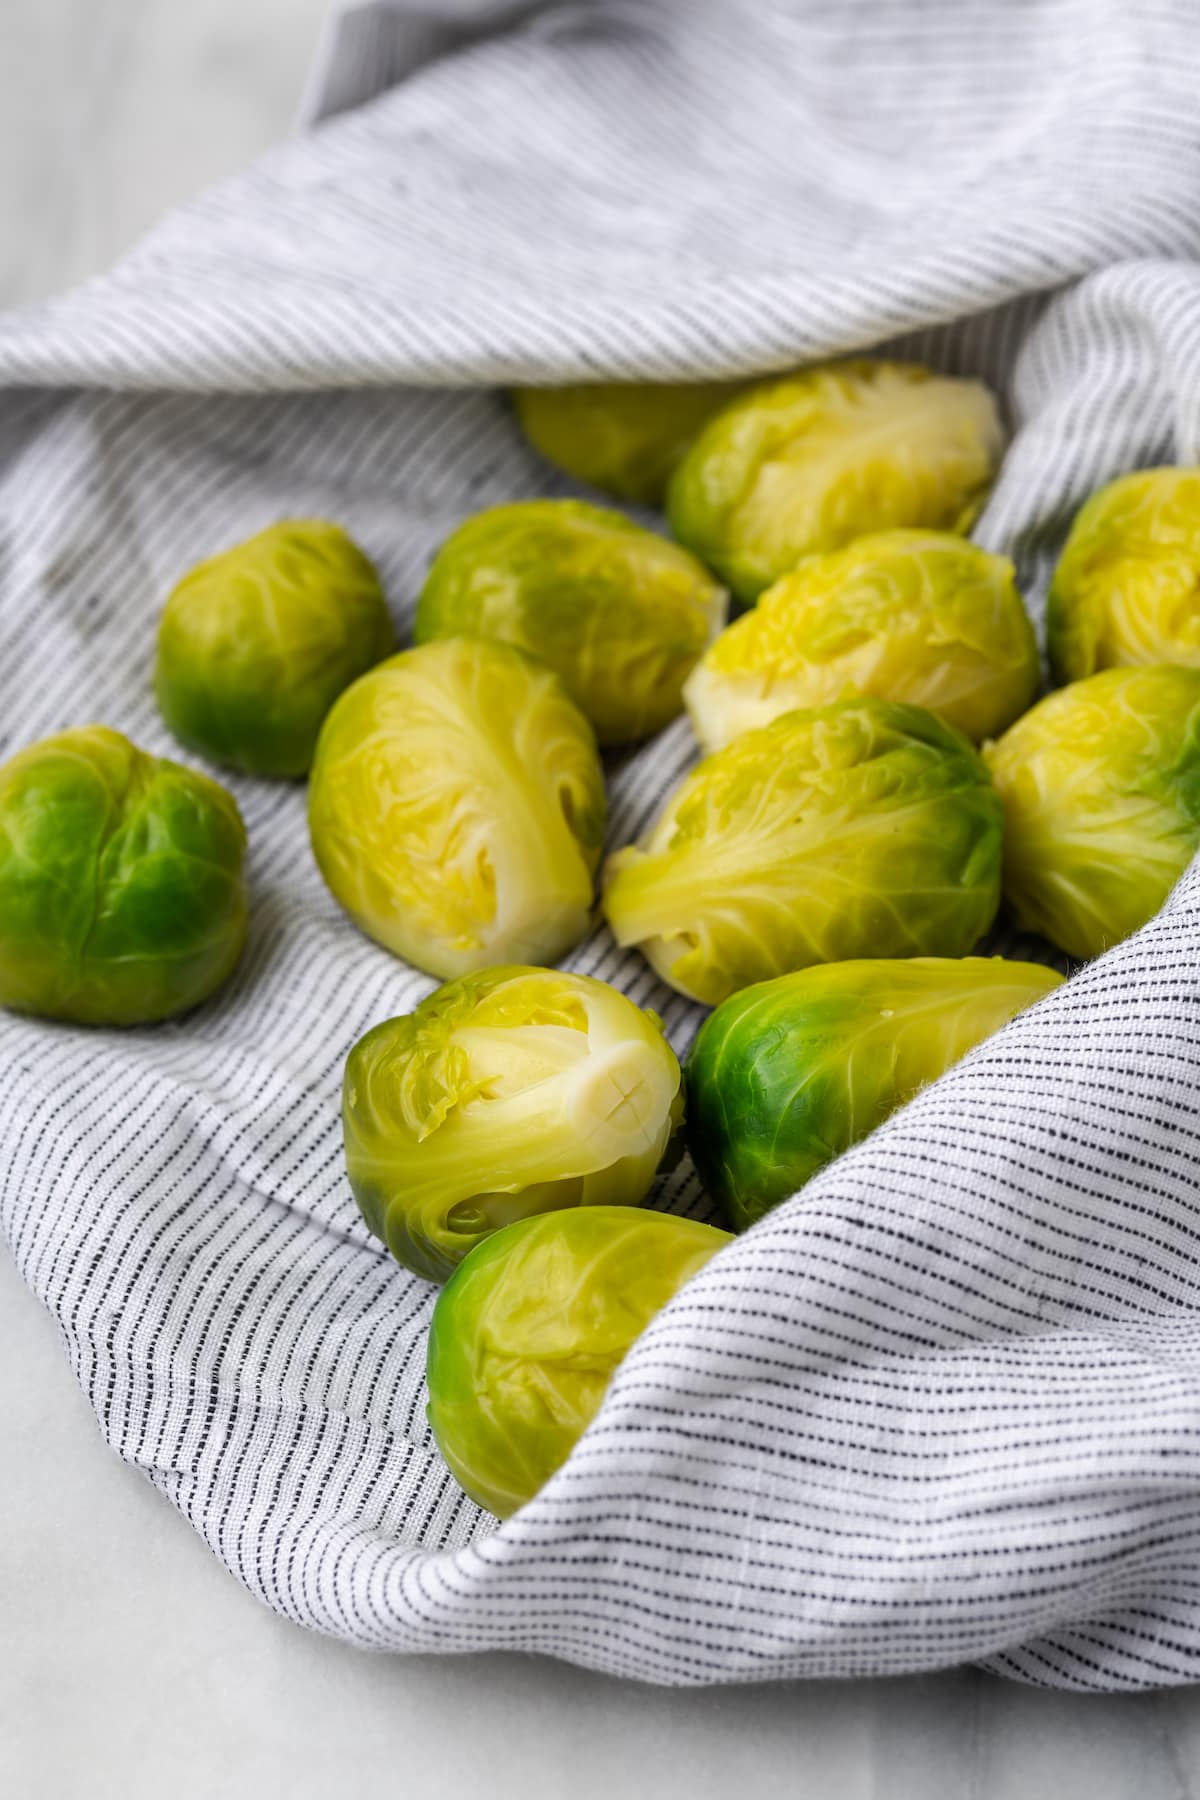 Boiled Brussels sprouts being dried with kitchen towel